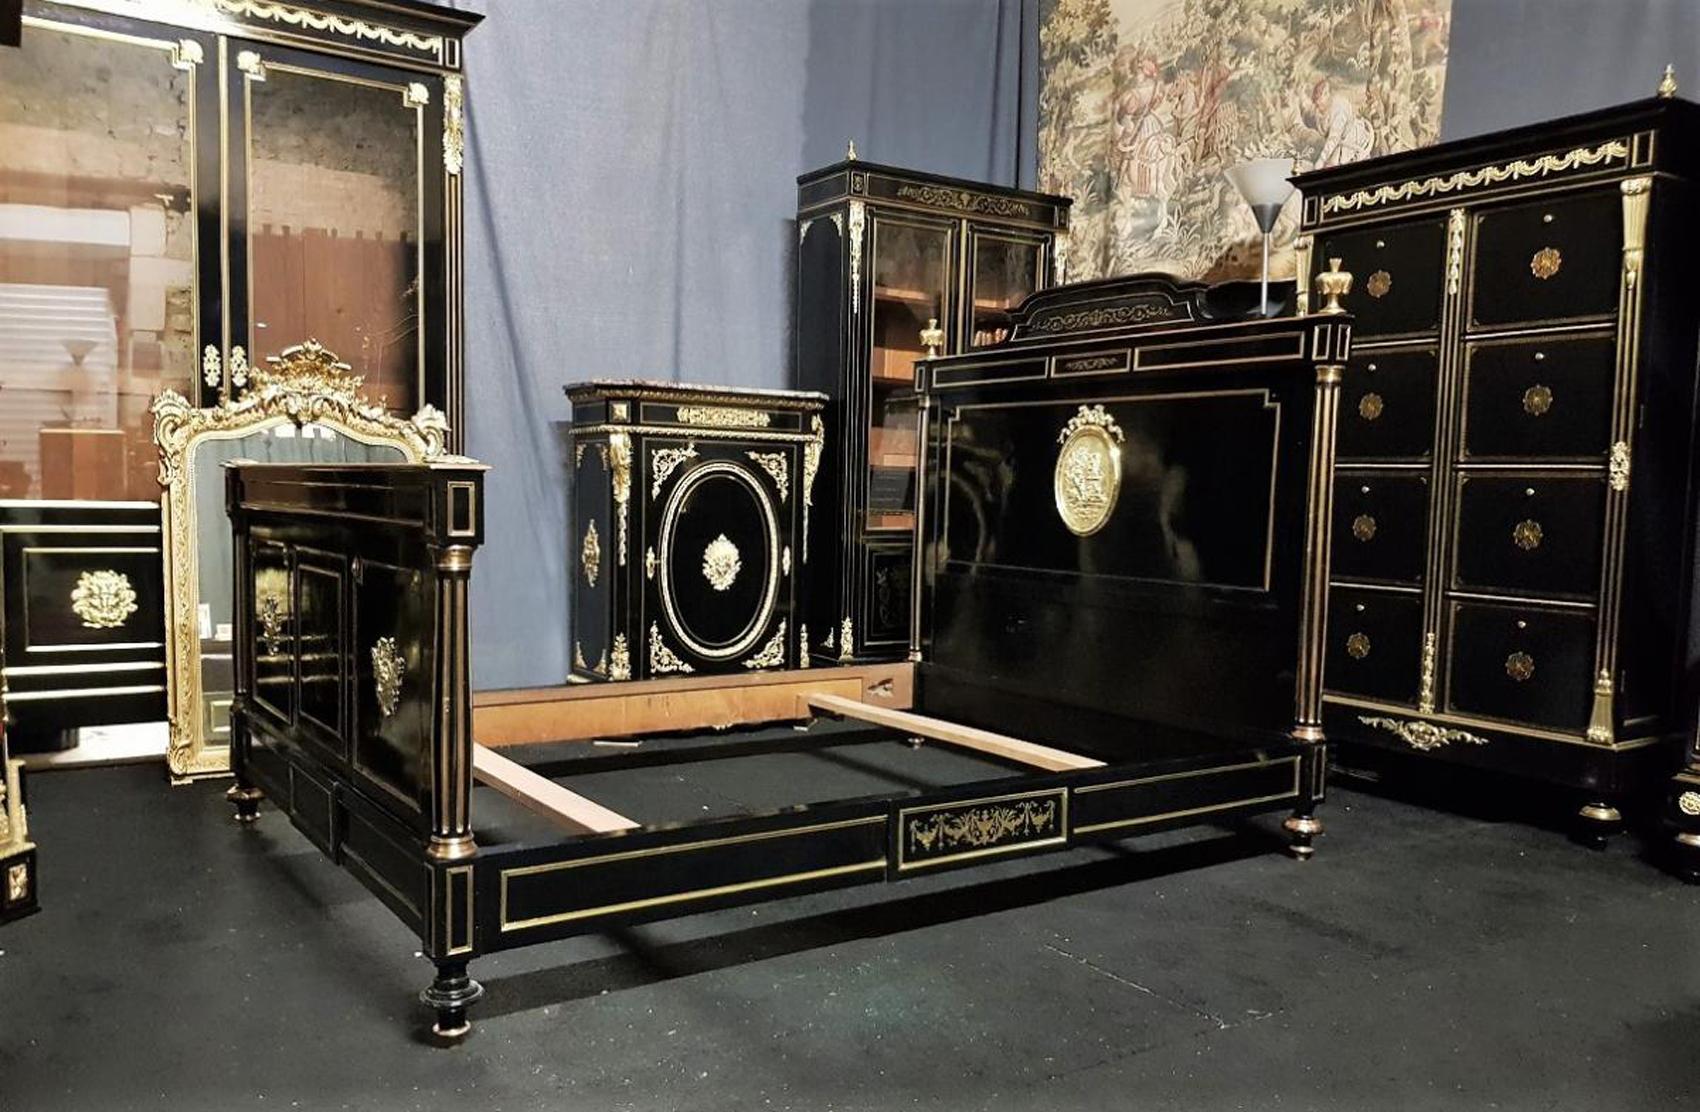 Rare stunning double bed in Boulle Marquetry with floral brass ornementations on the head, and the foot boards and sides. Rich gilt bronze ornementations of mascarons, spandrels, medals, pine cones etc.
Dimensions: standard mattress 140 cm x 195